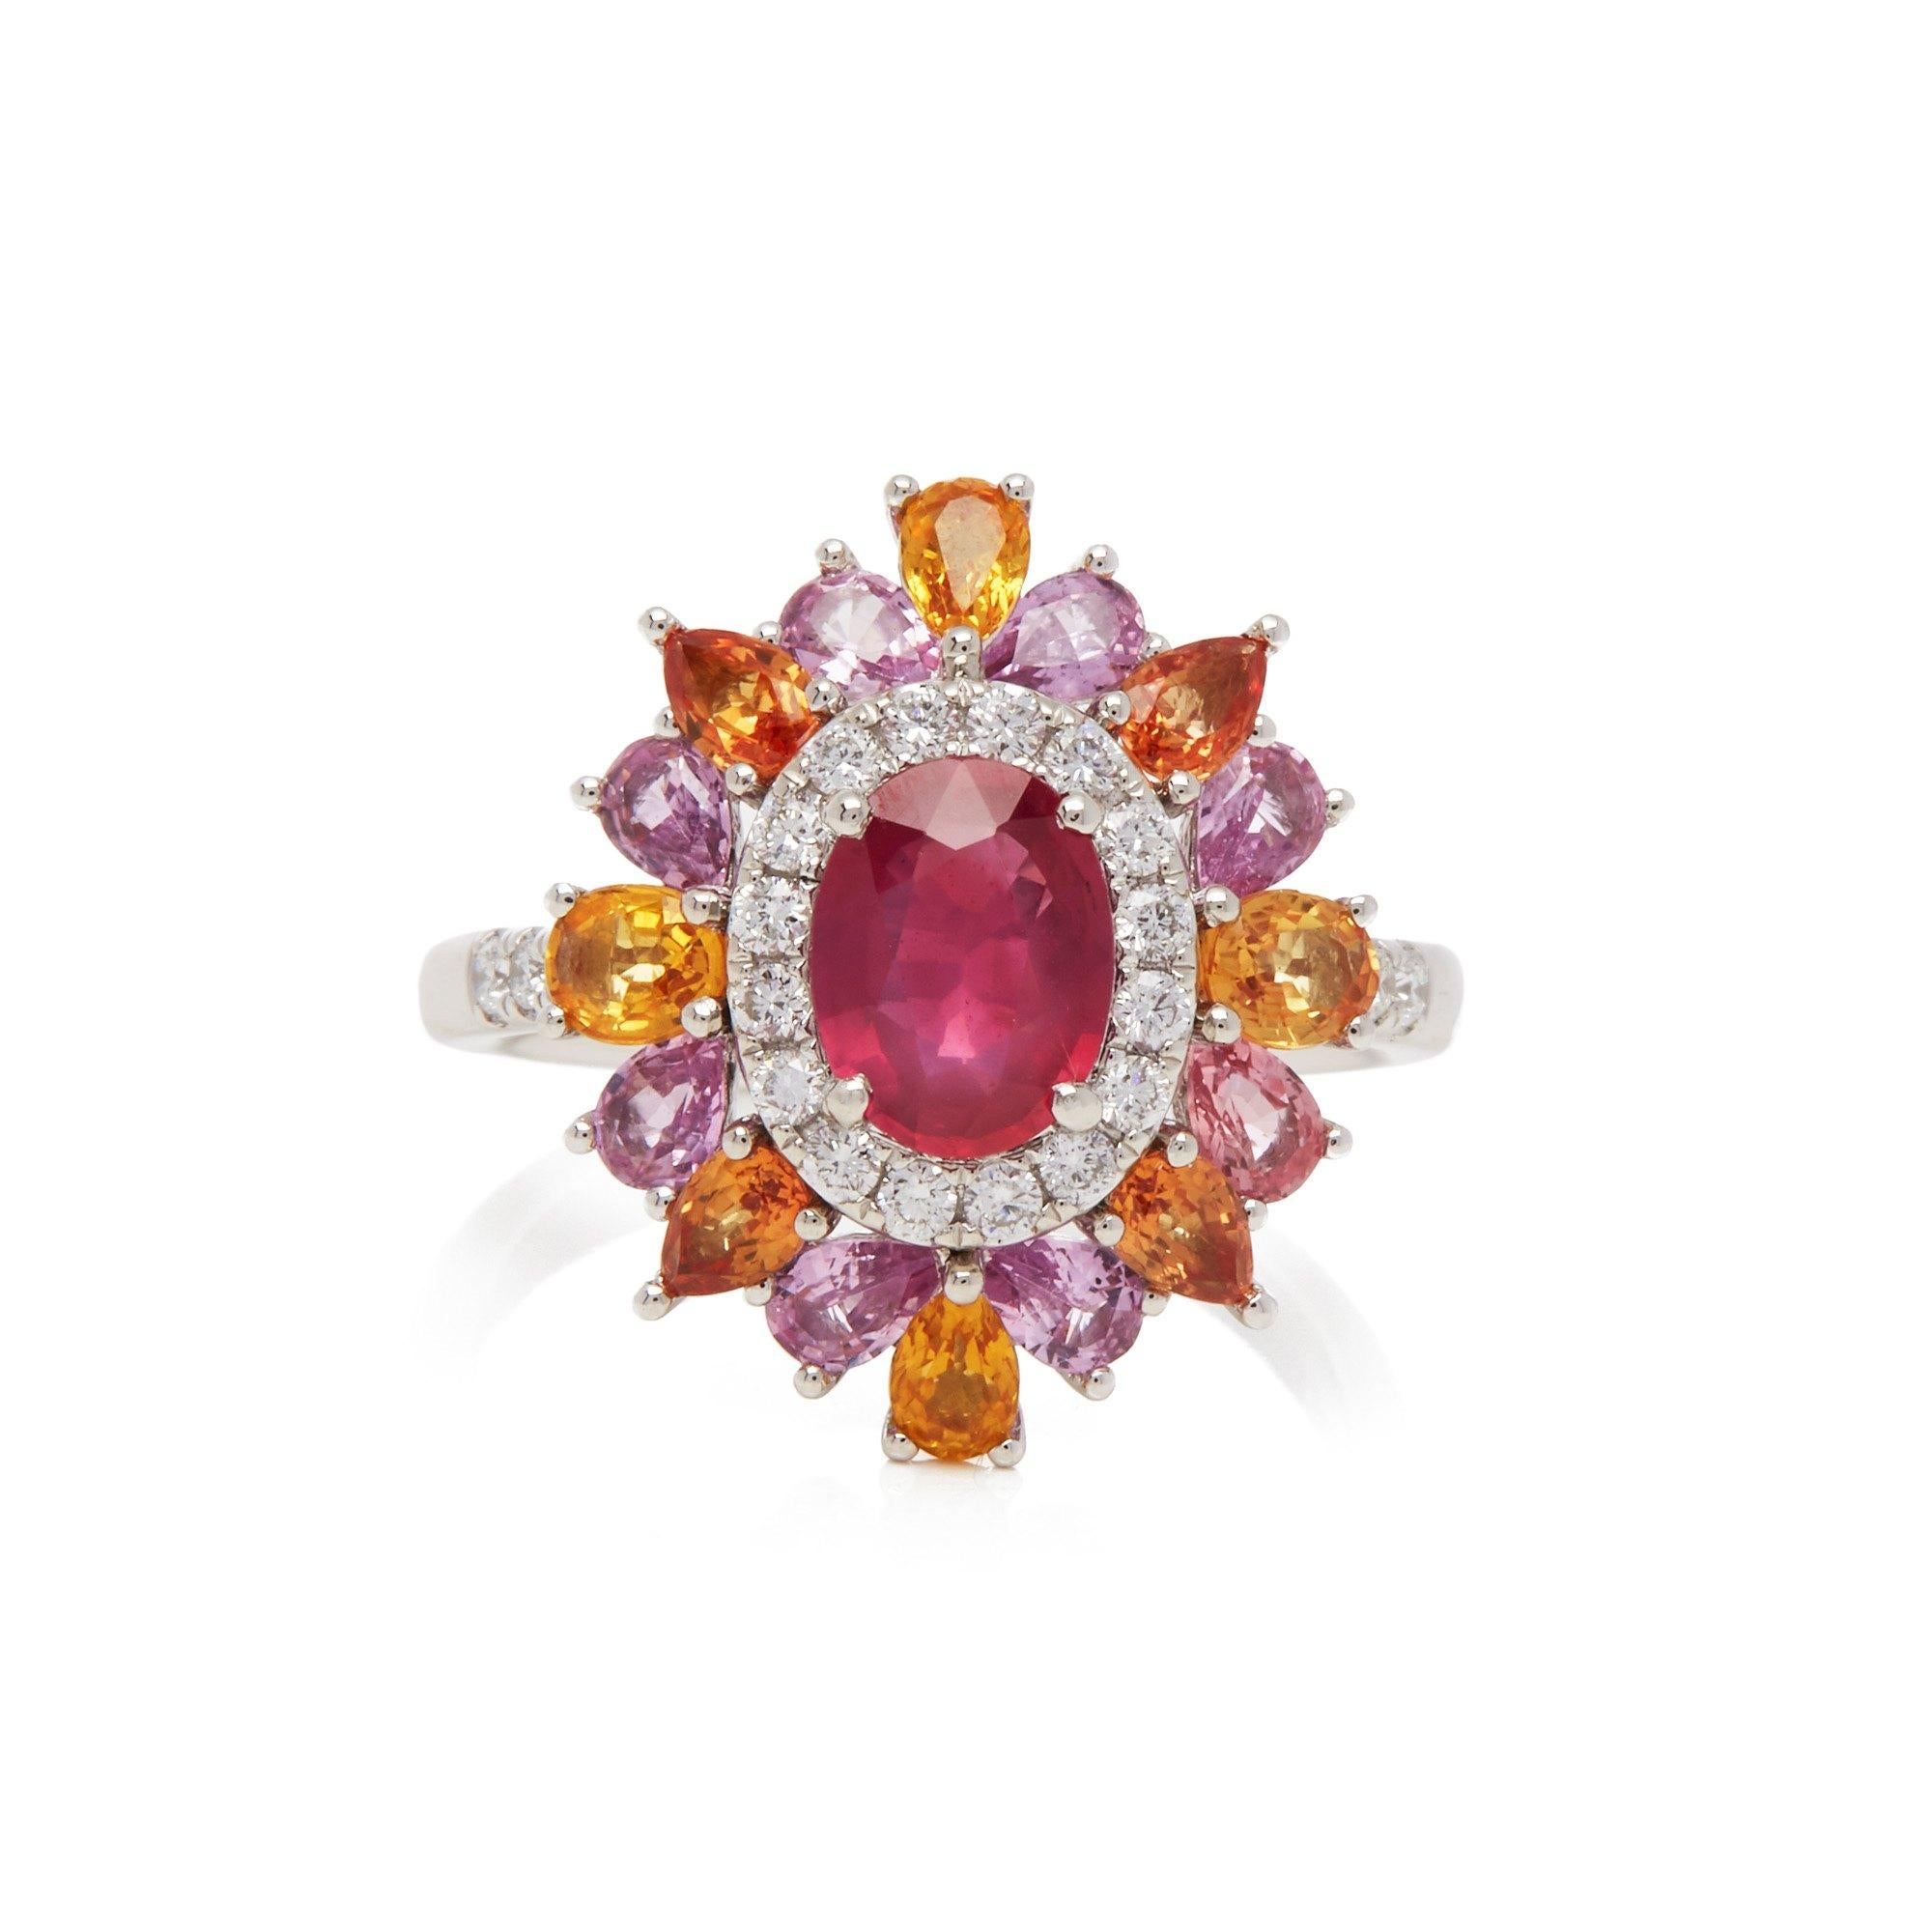 This ring designed by David Jerome is from his private collection and features one oval cut Ruby sourced in Mozambique totalling 1.19cts. Set with a mix of round brilliant cut Diamonds, pink and yellow Sapphires totalling 2.66cts combined. Mounted